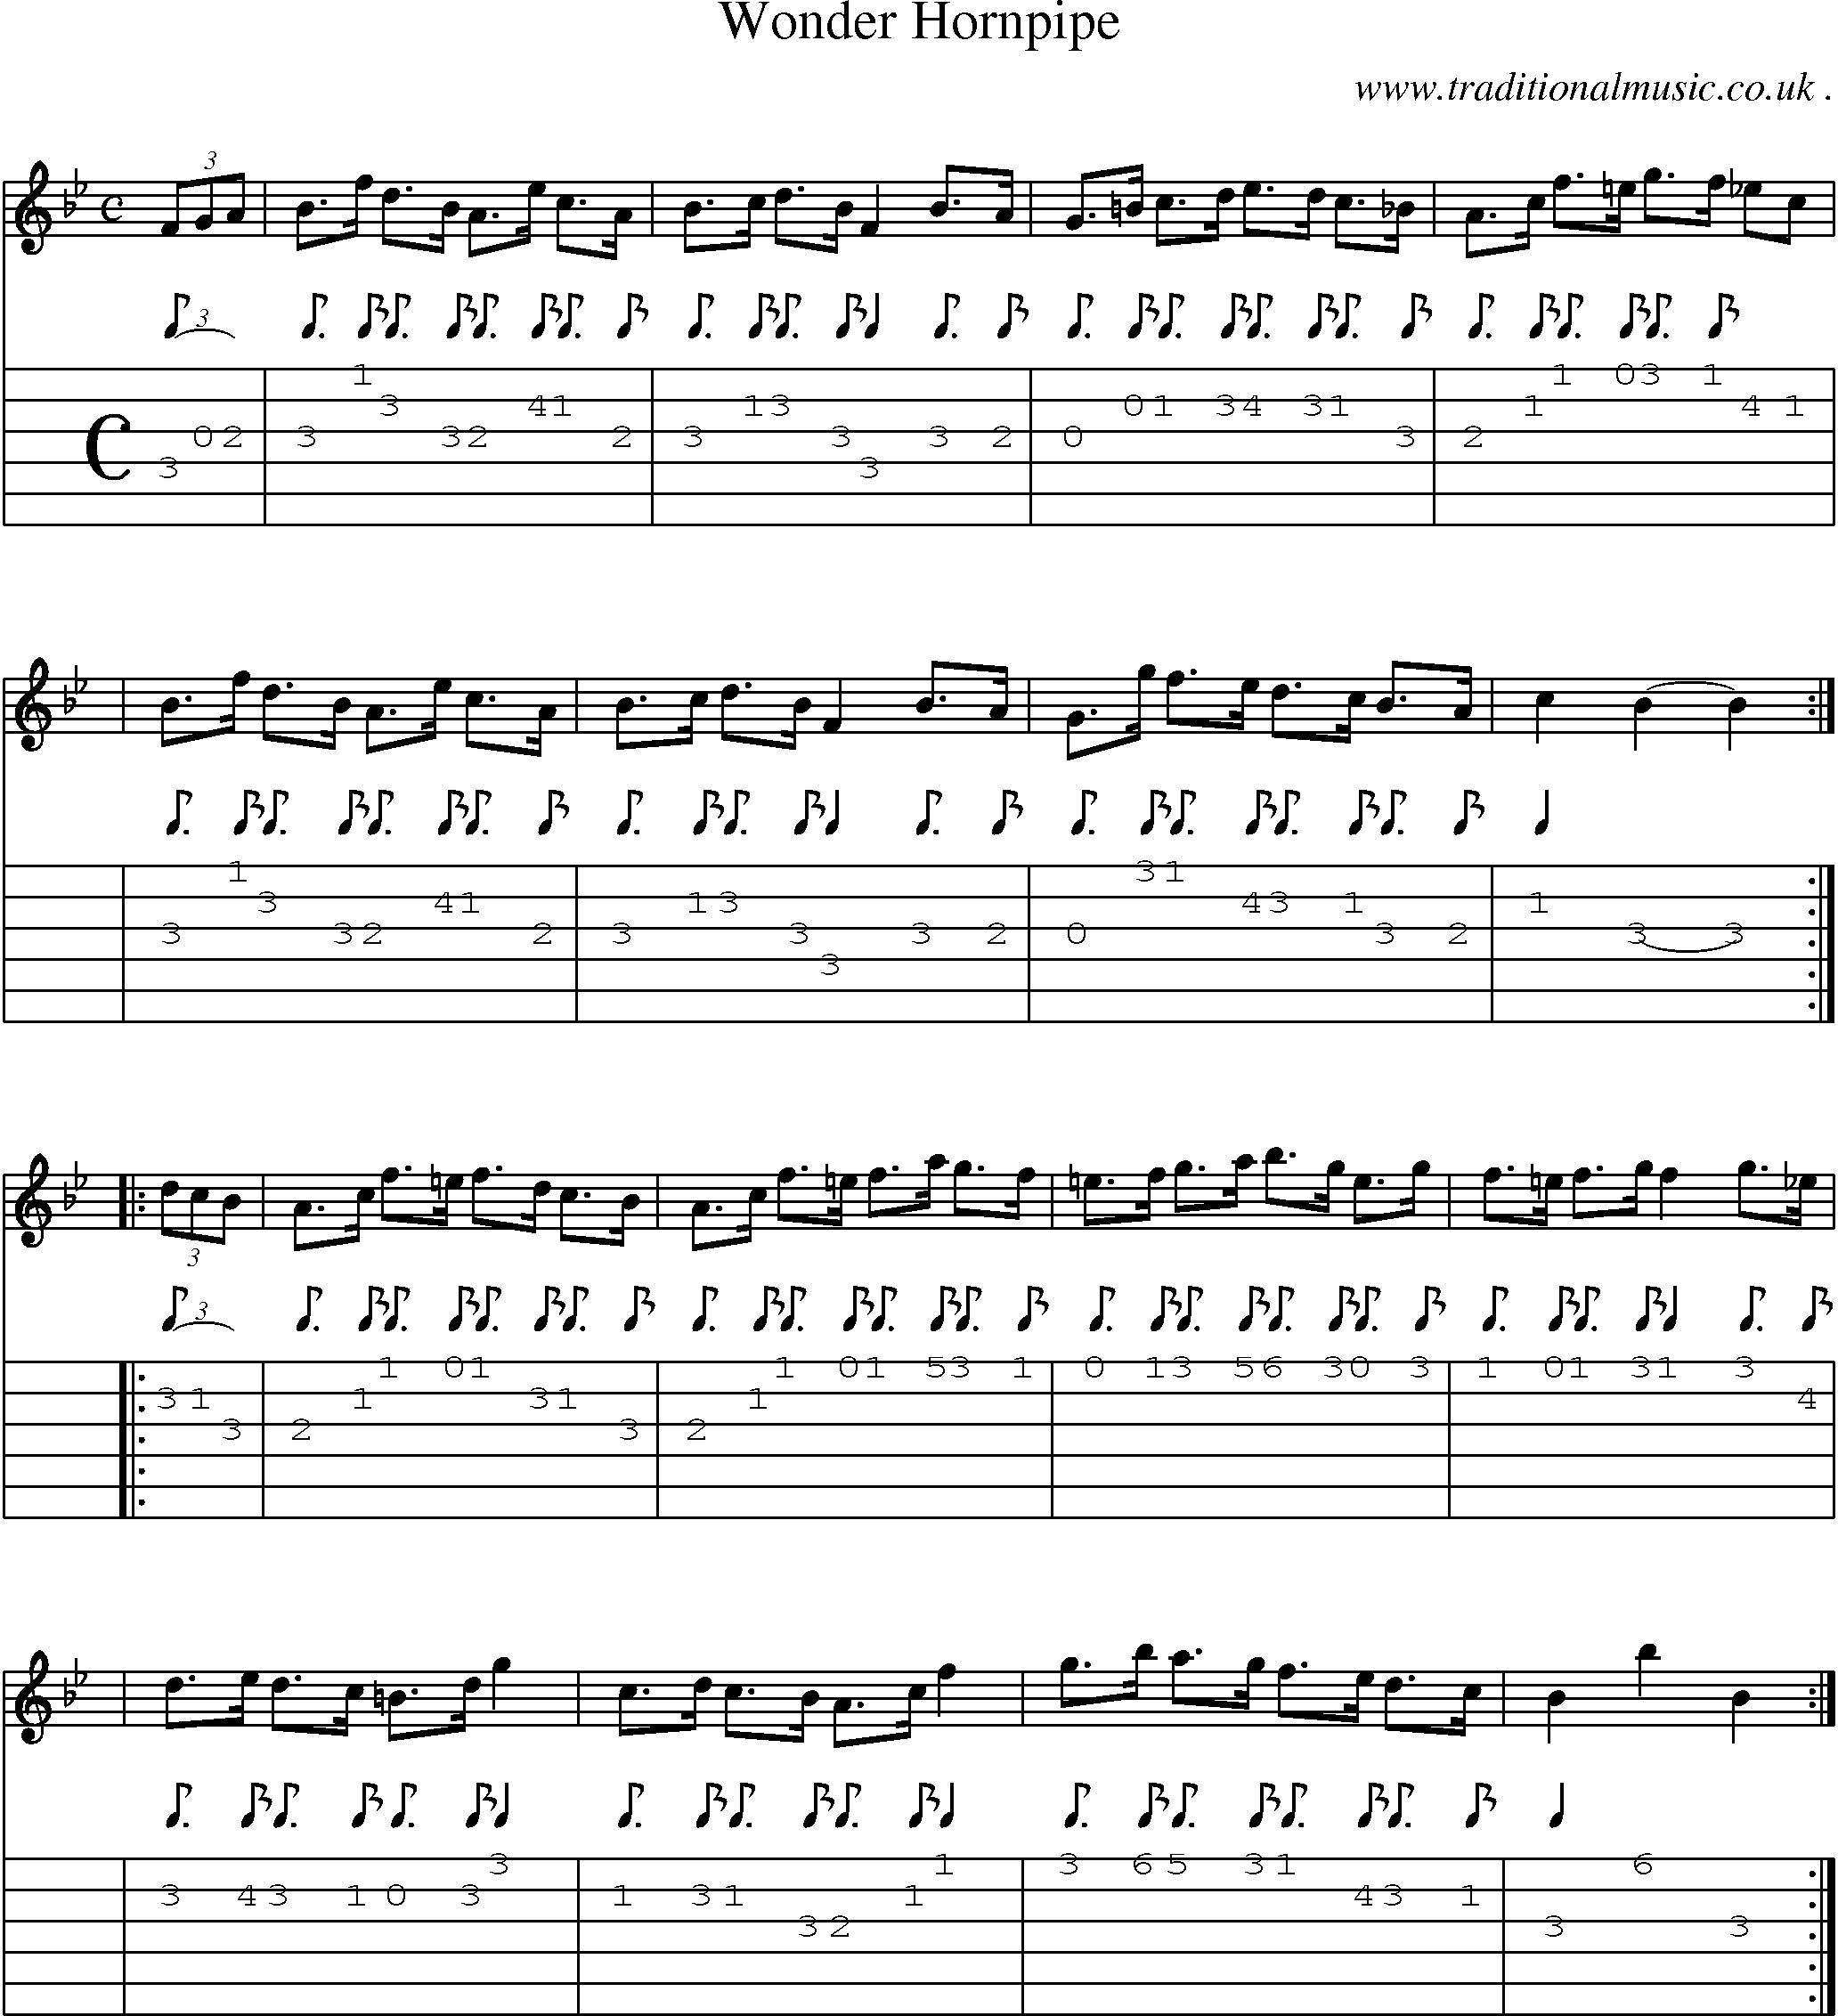 Sheet-music  score, Chords and Guitar Tabs for Wonder Hornpipe